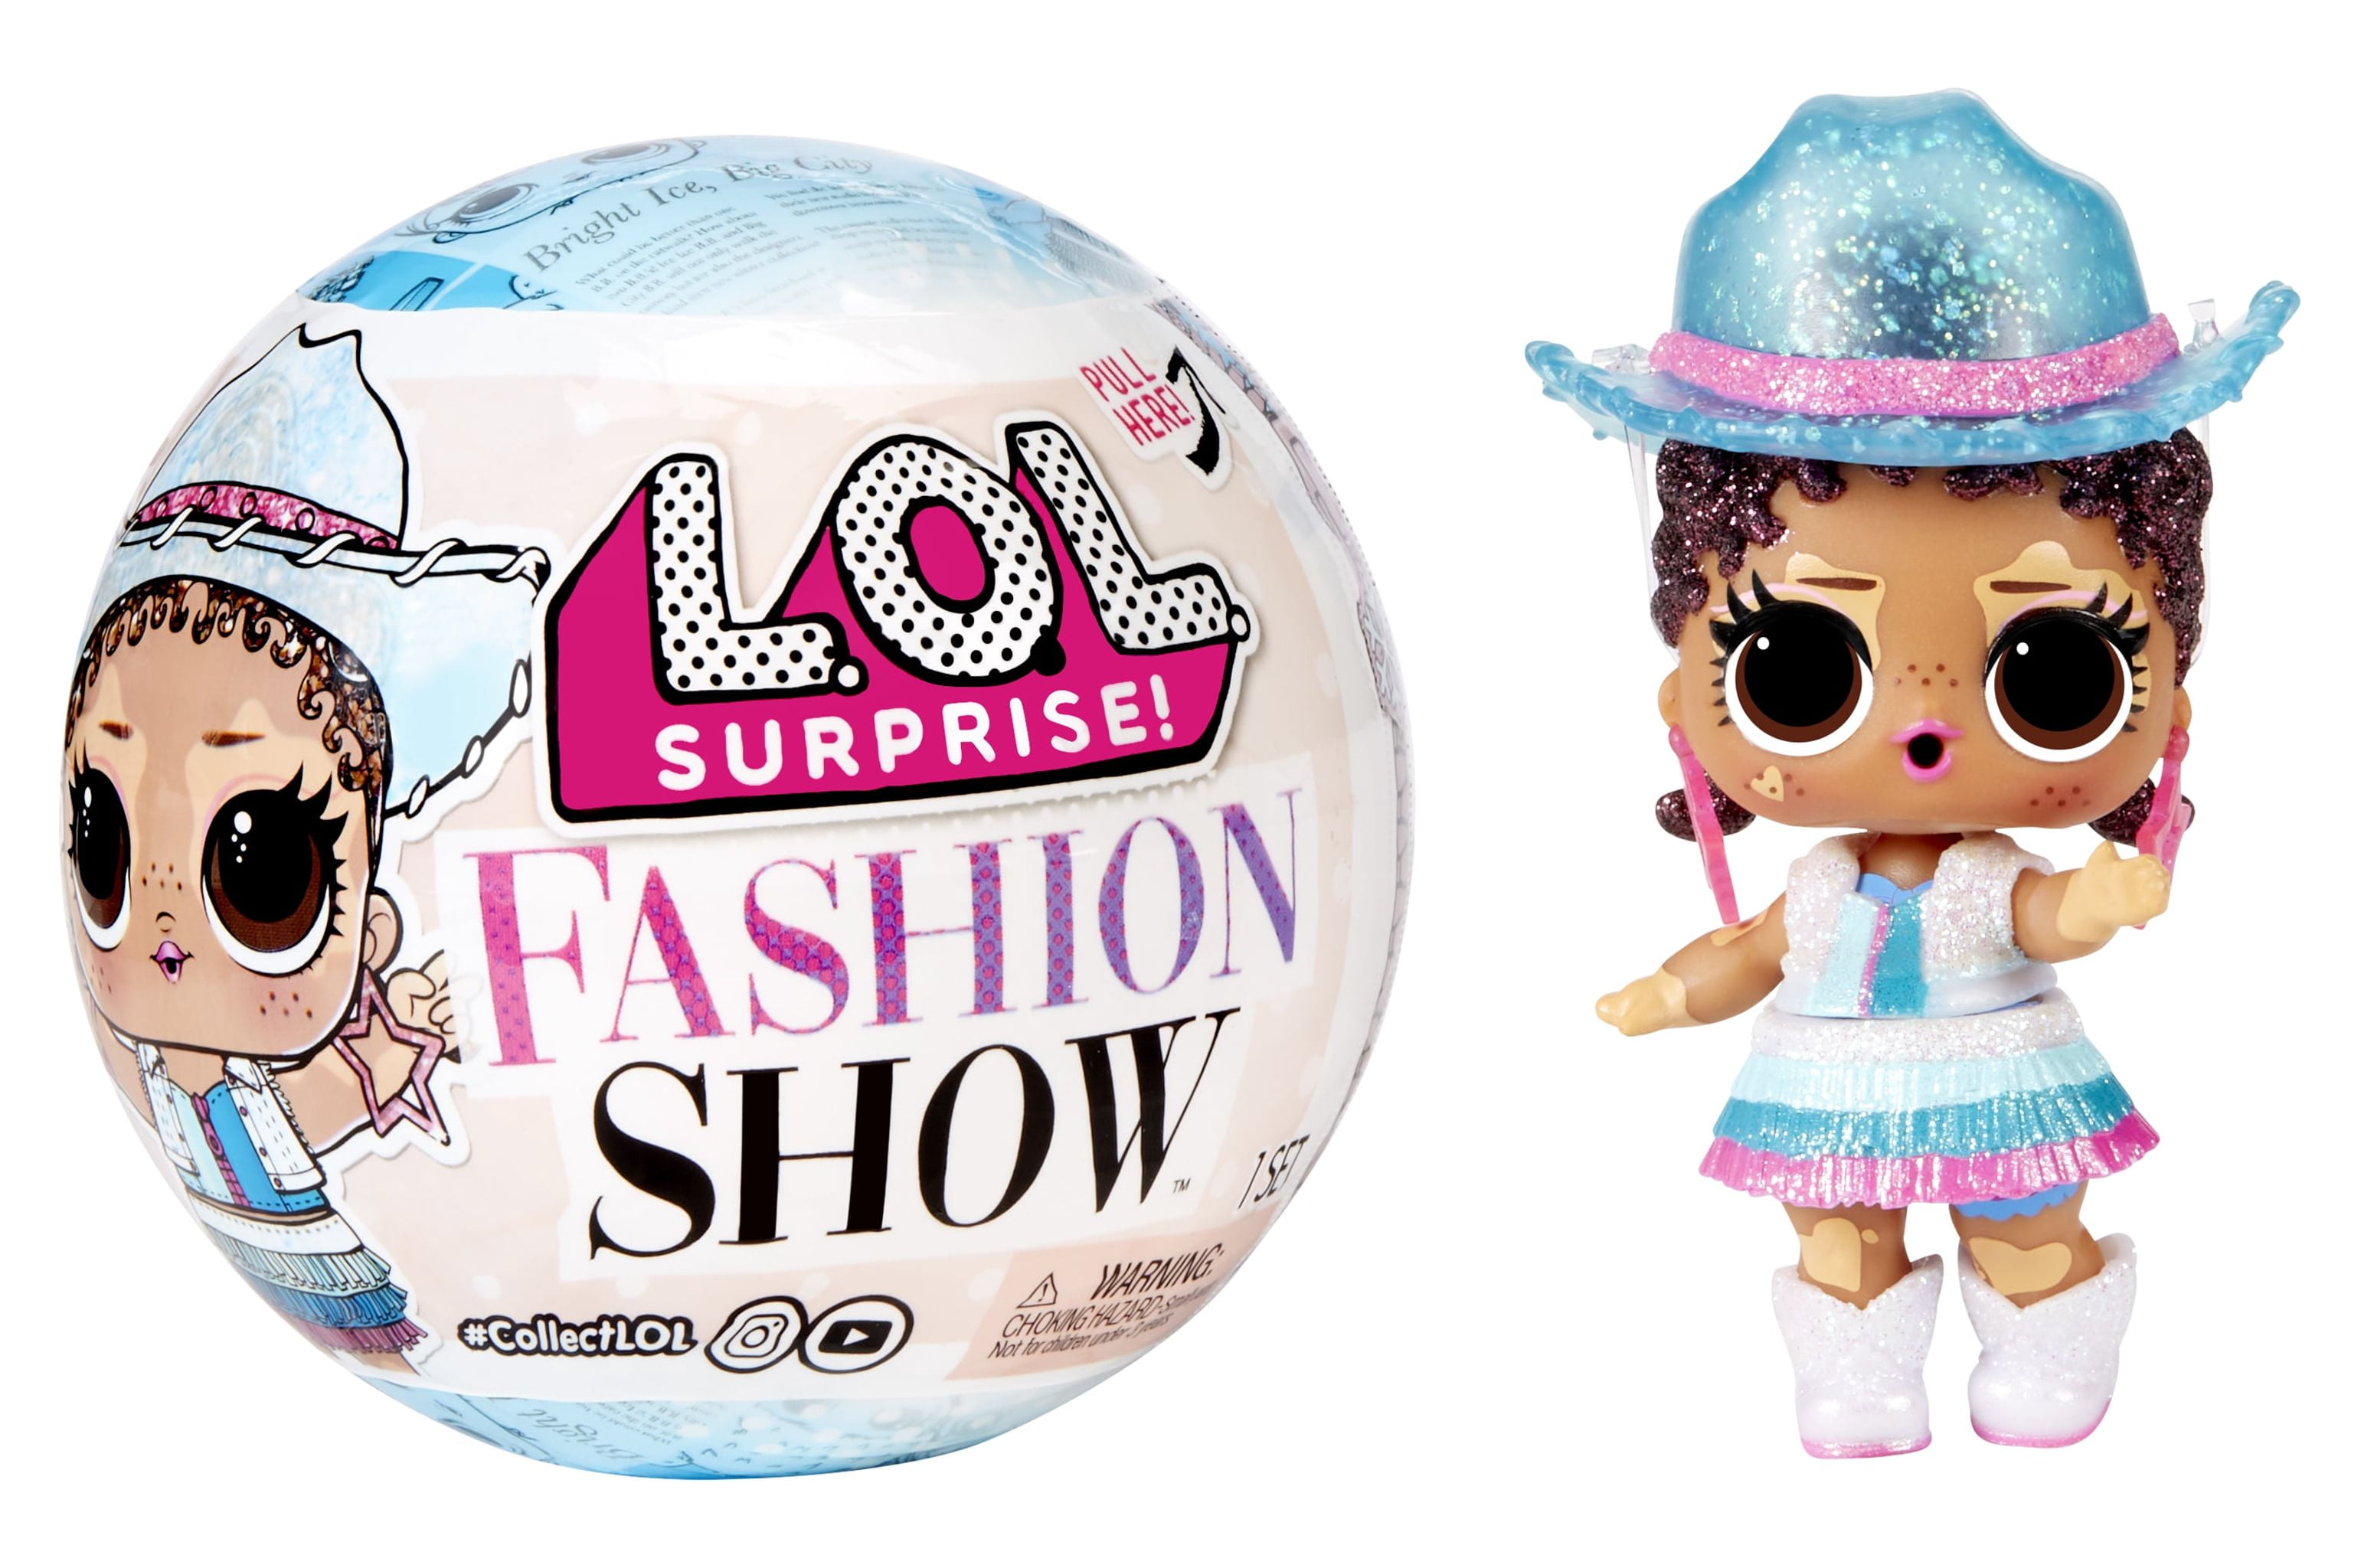 LOL Surprise Dolls Party Favour Ball - KF Party Couture